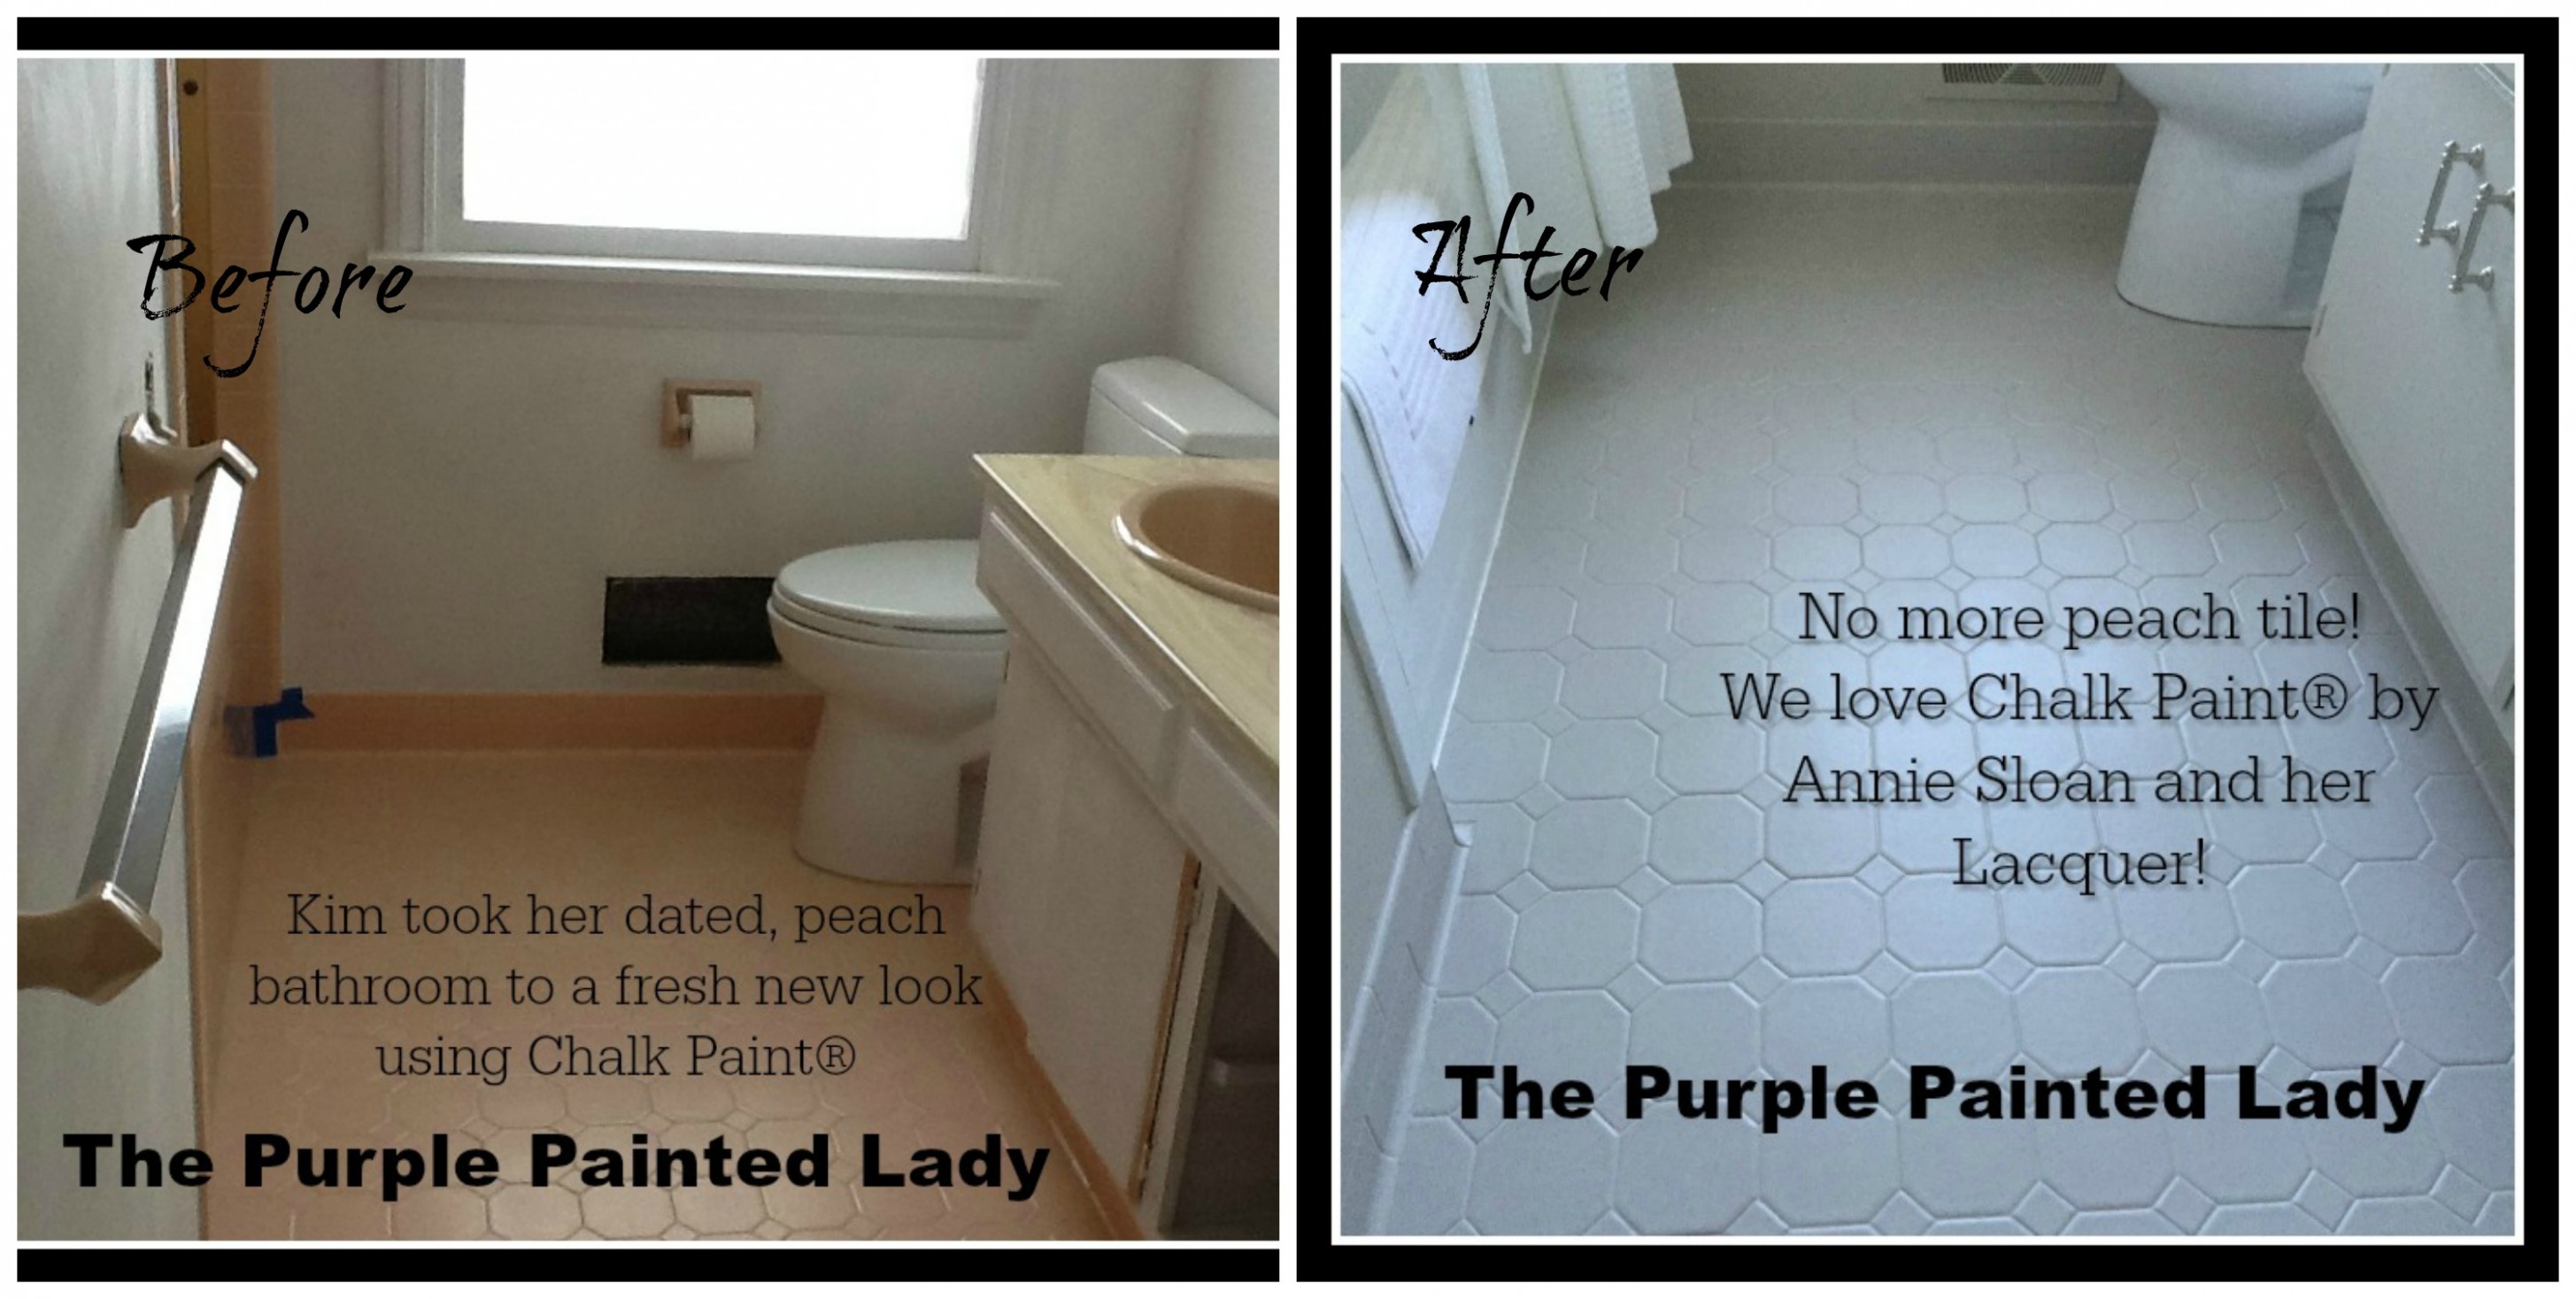 Painting Tile In The Bathroom With Chalk Paint® | The Purple ..